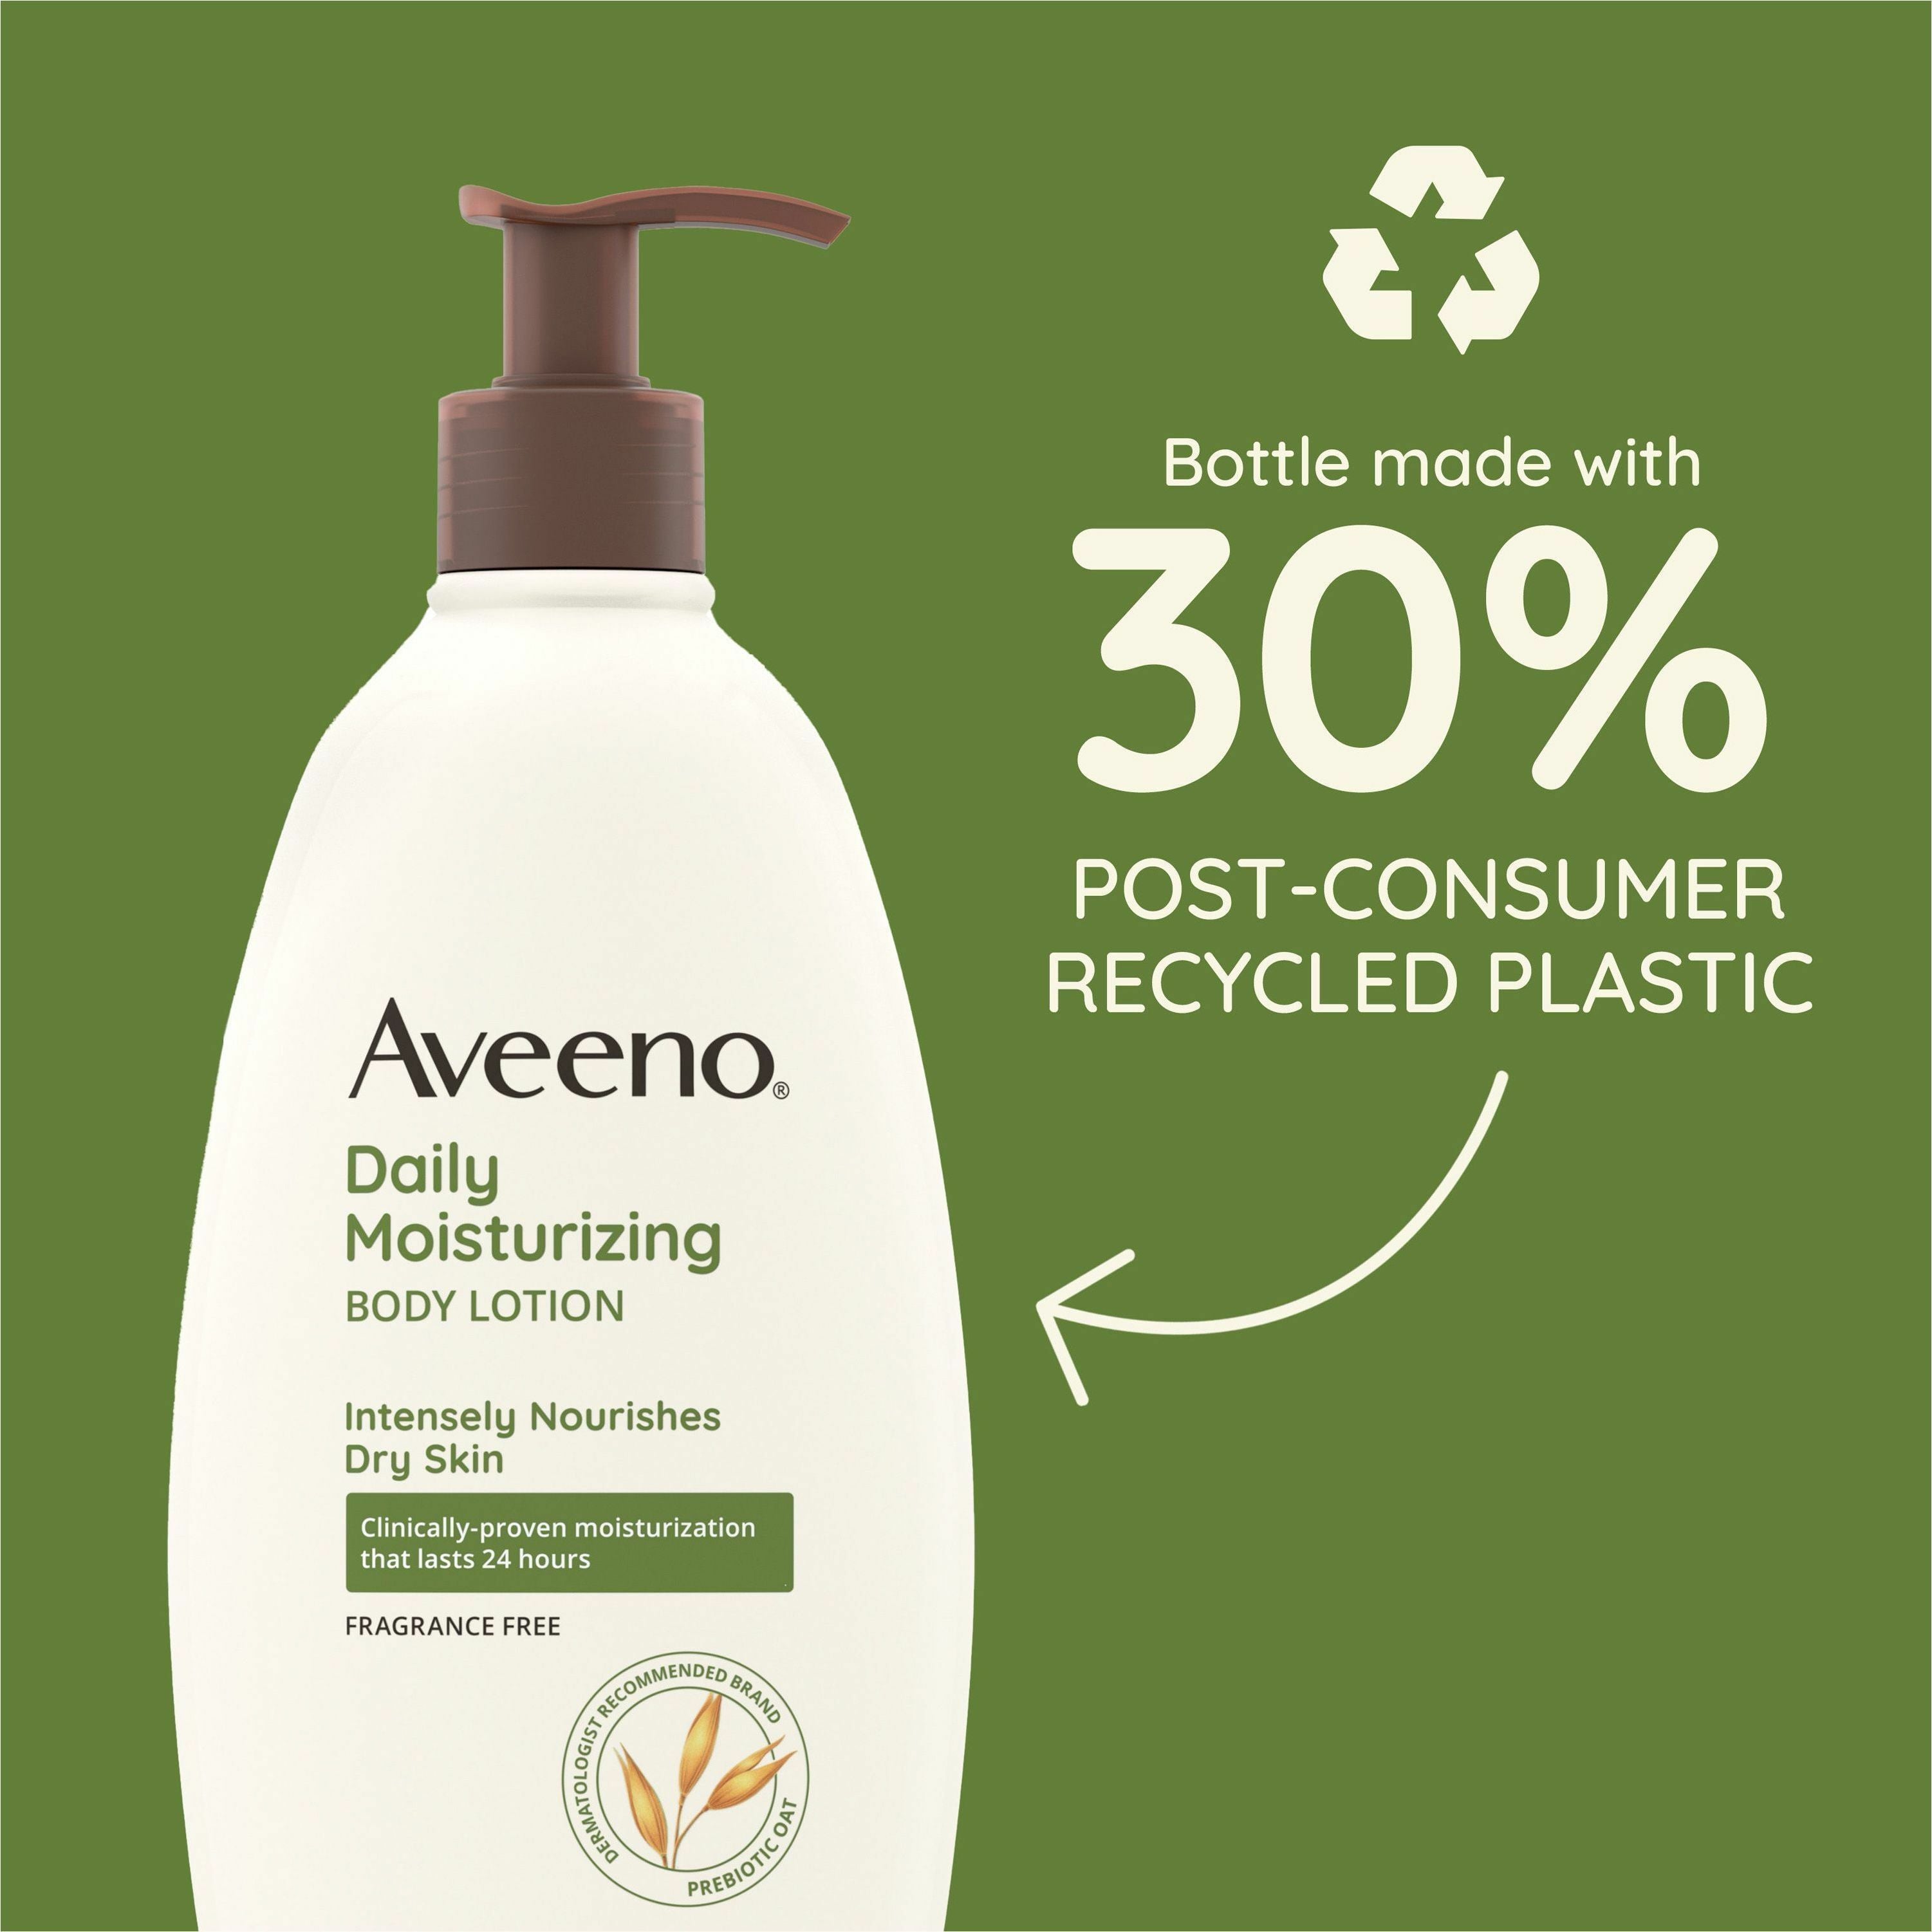 aveeno-daily-moisturizing-body-lotion-lotion-18-fl-oz-for-dry-skin-applicable-on-body-moisturising-fragrance-free-non-greasy-non-comedogenic-soothing-oat-rich-emollients-nourishes-dry-skin-gentle-1-each_joj003844 - 4